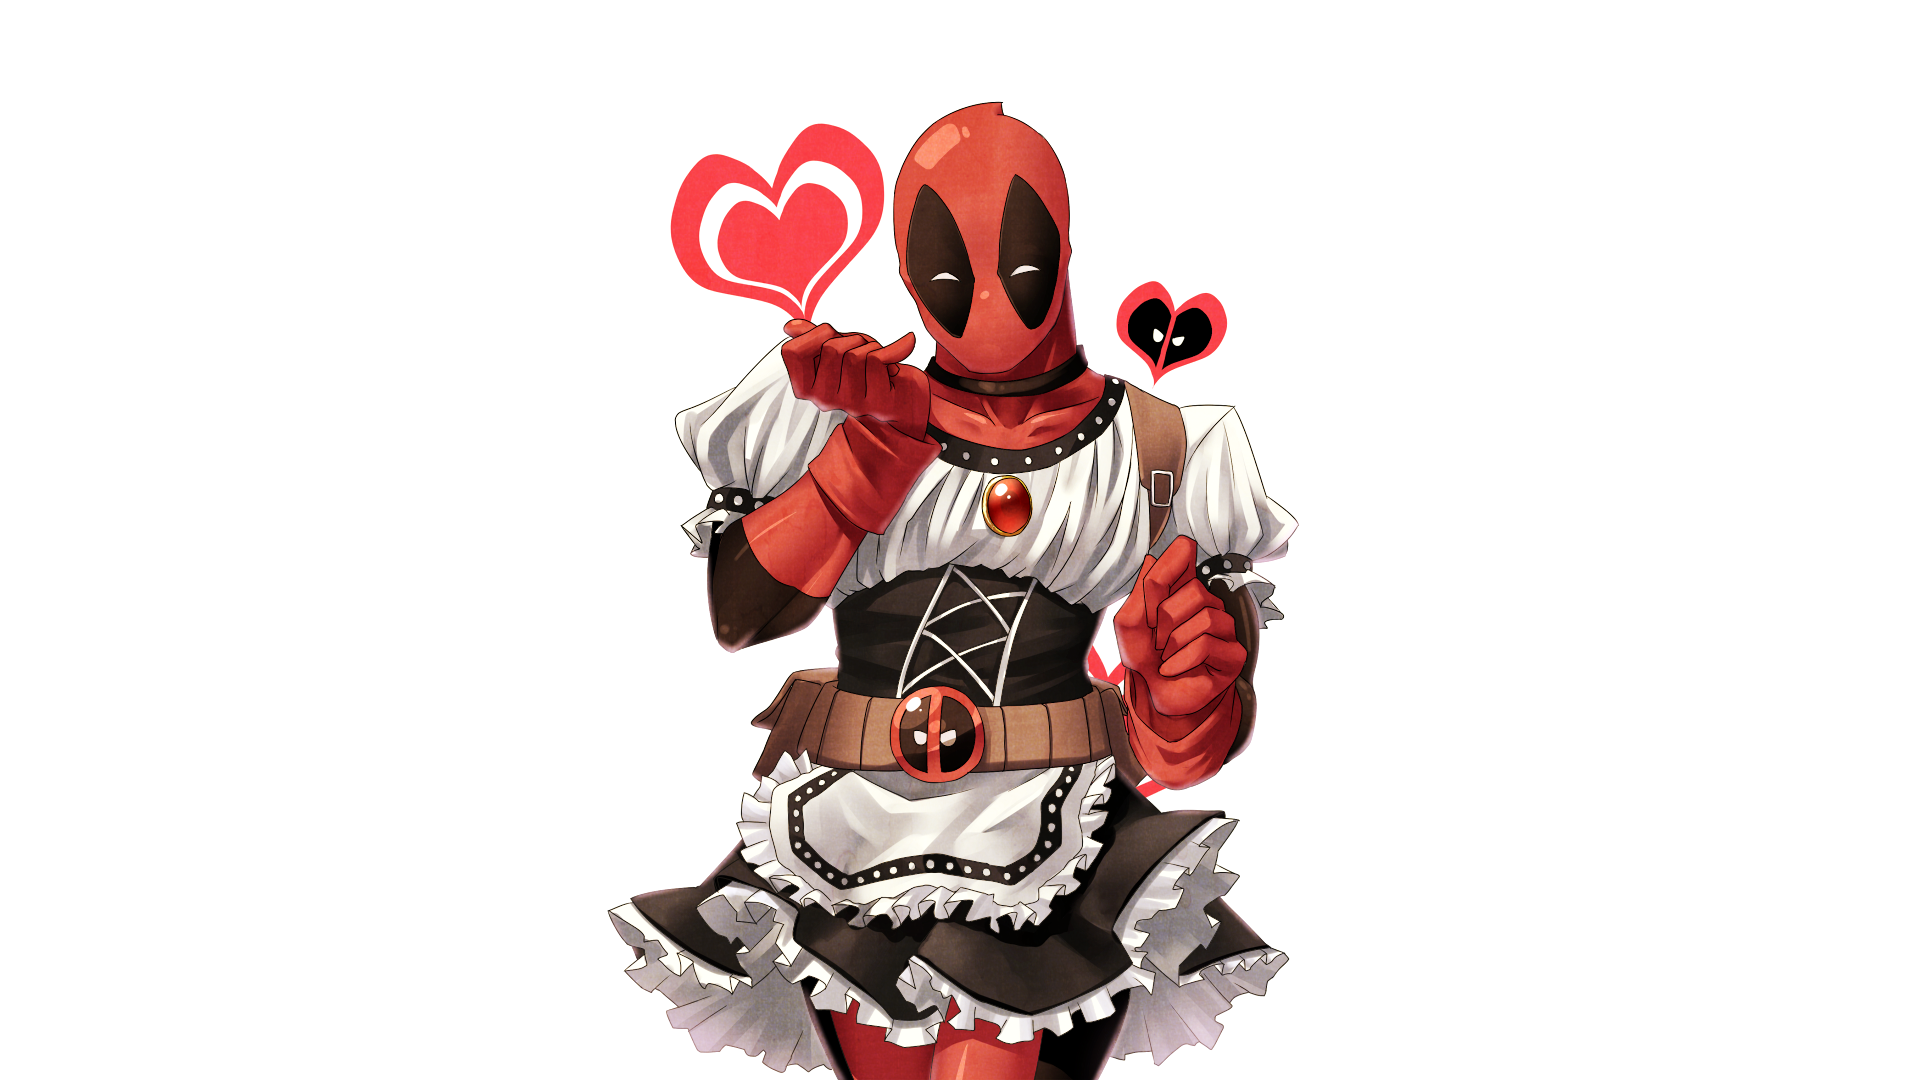 General 1920x1080 Deadpool maid outfit antiheroes Wade Wilson white background simple background heart (design) maid dress superhero